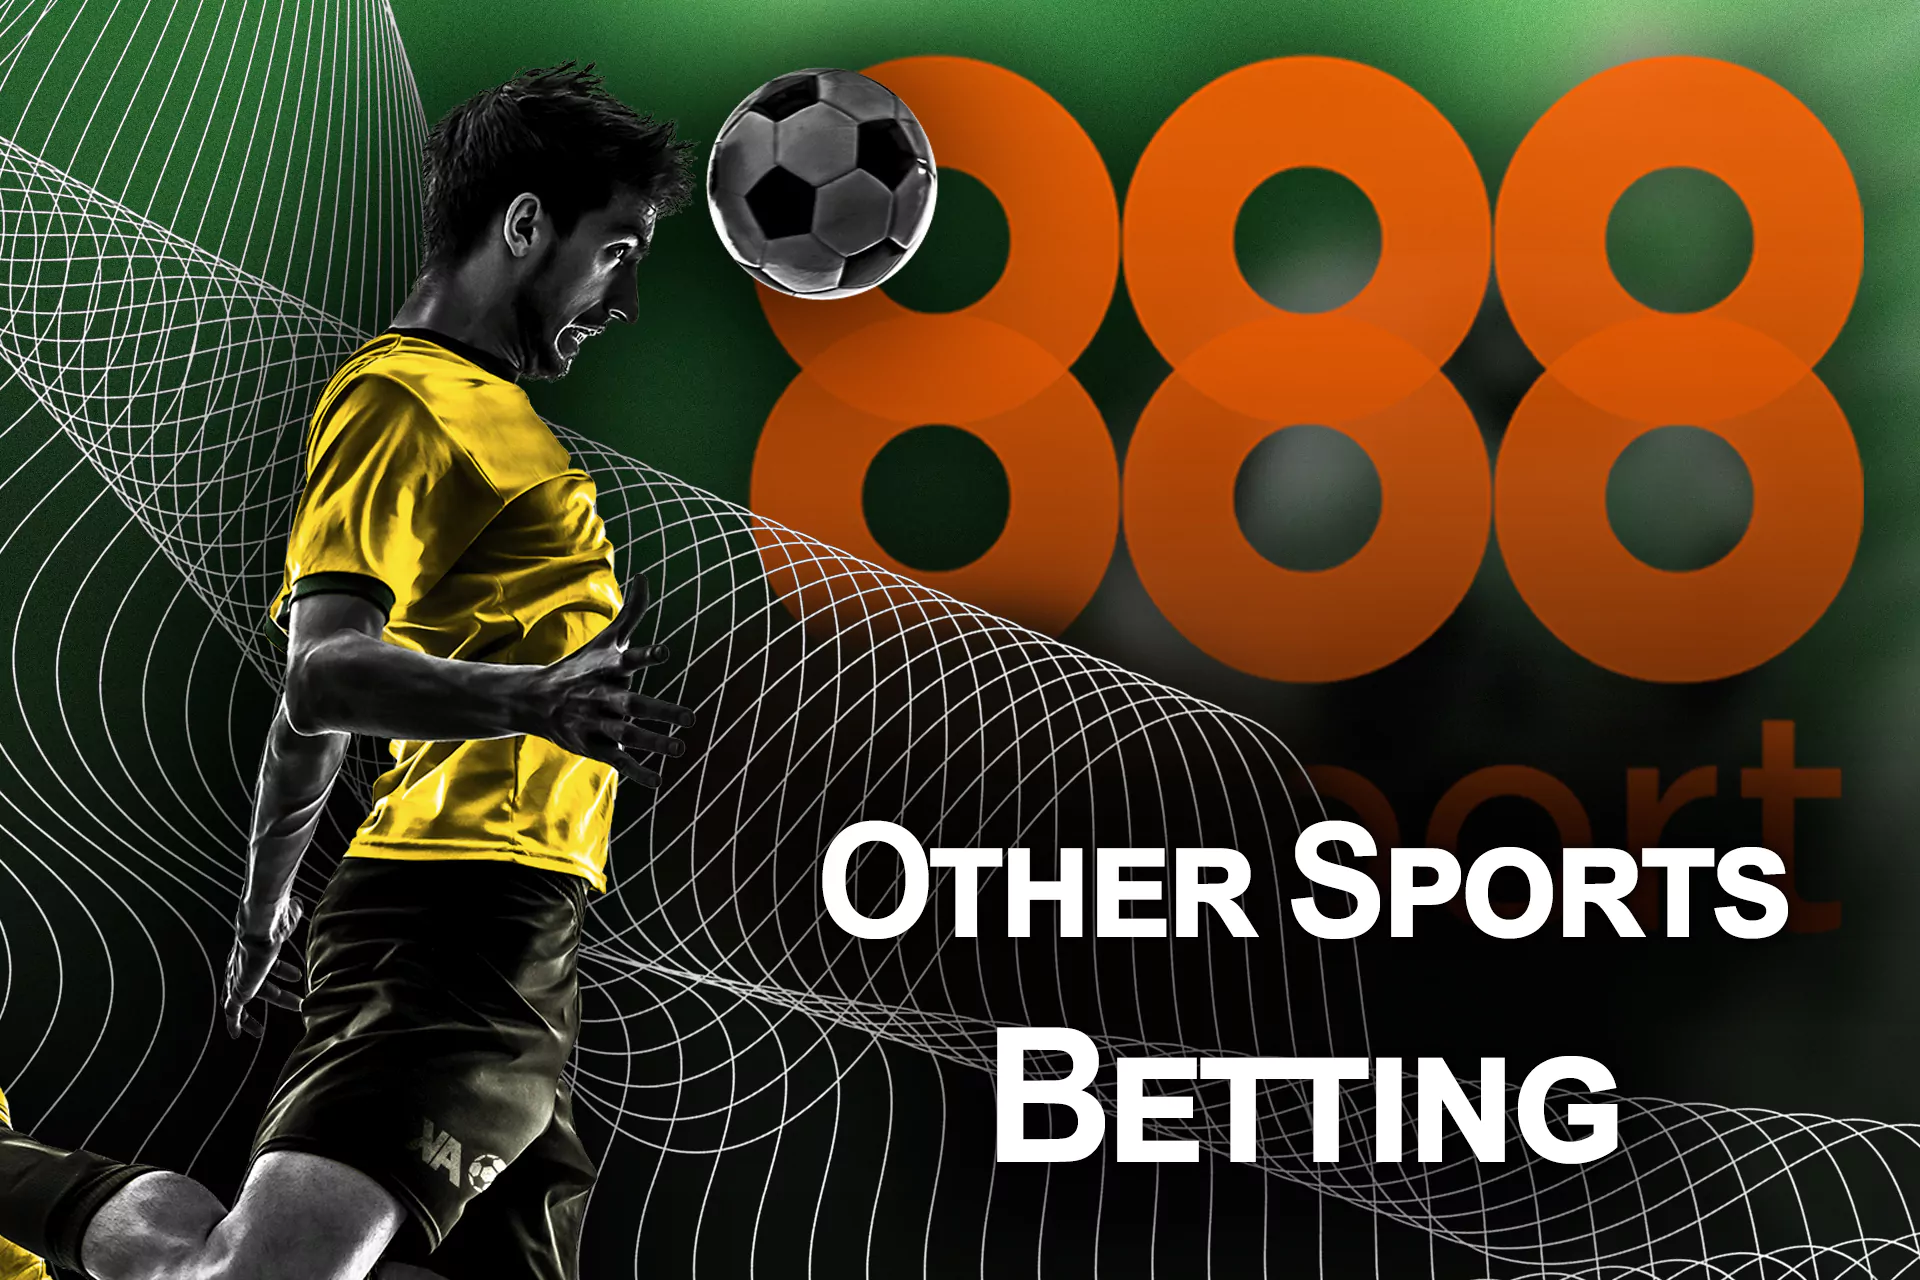 If you are a fan of any other sports discipline, you can find it in the sportsbook as well.